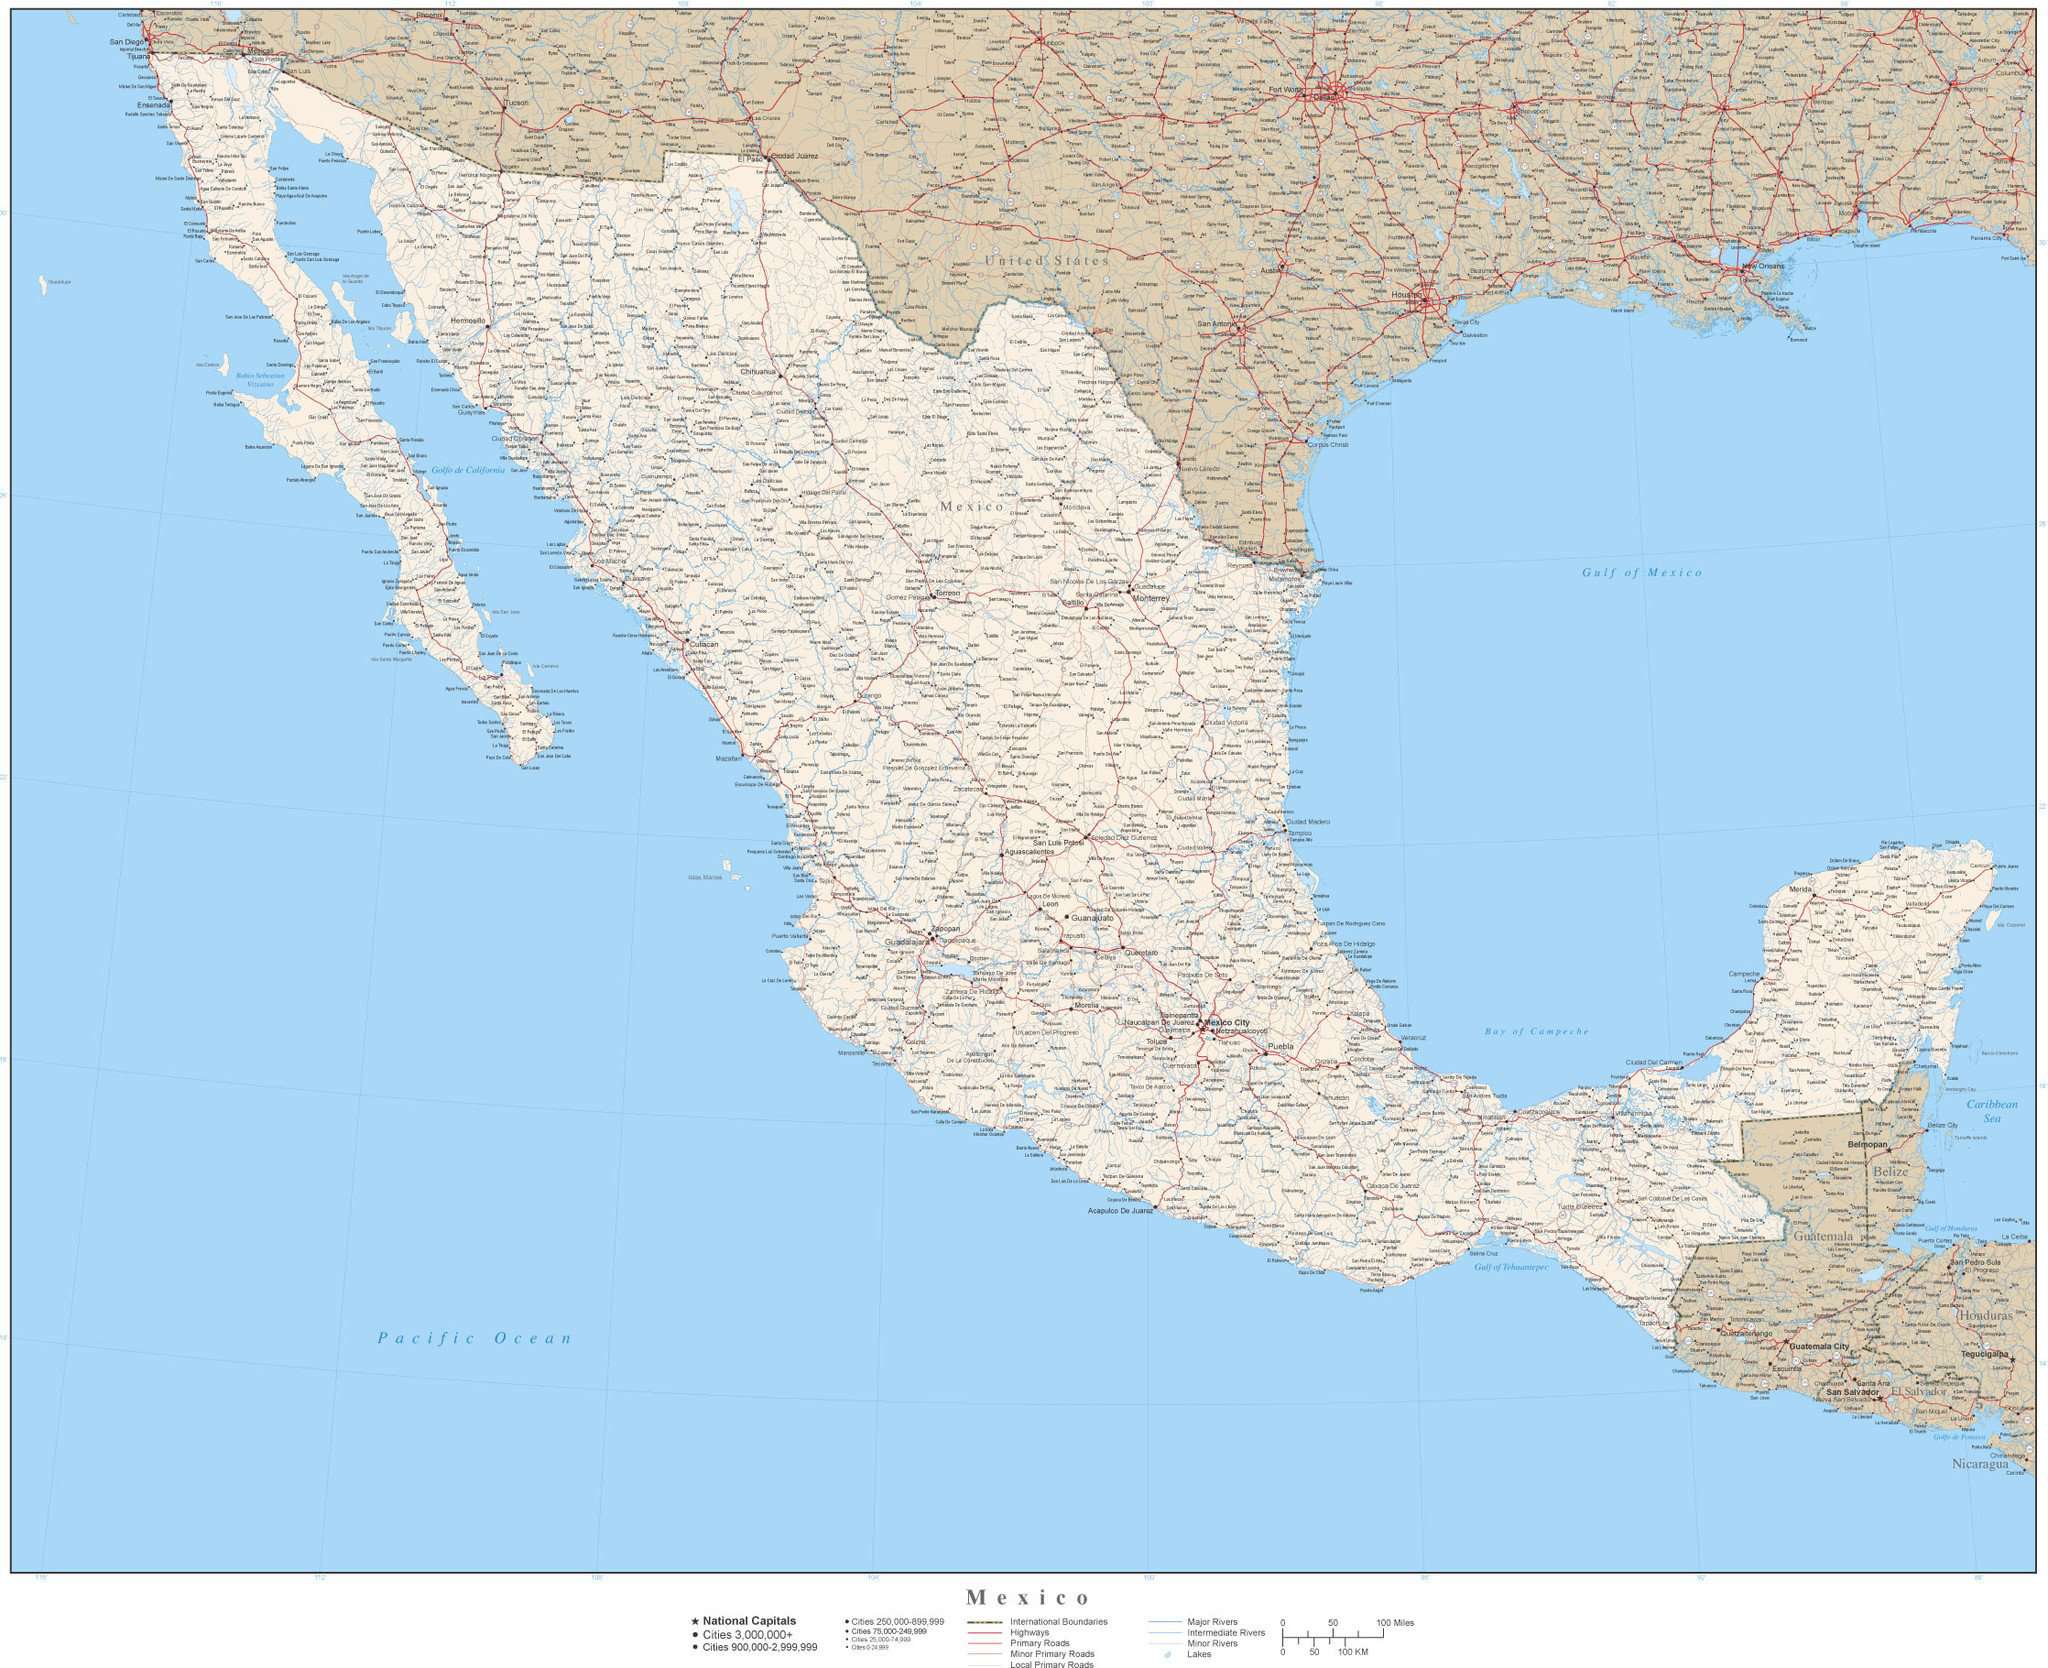 Mexico Map With Cities In Adobe Illustrator Vector Format